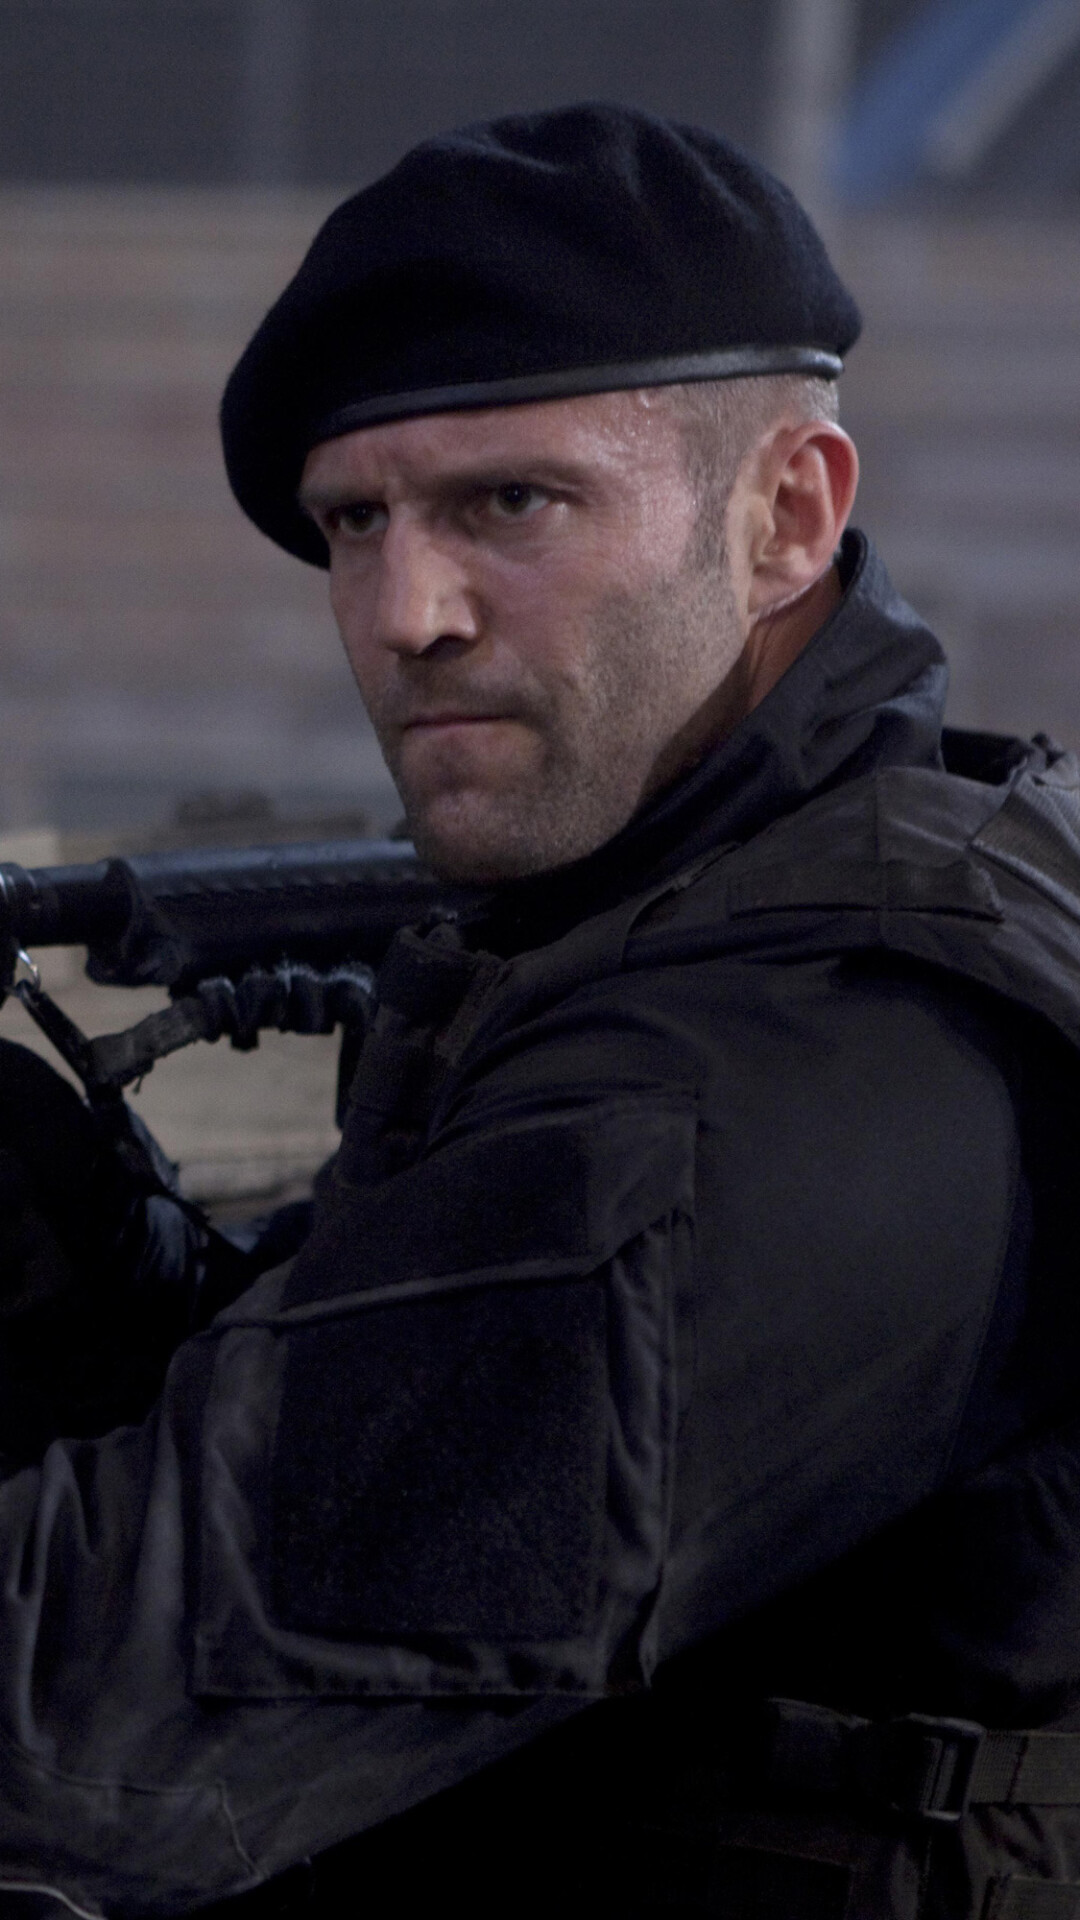 The Expendables 4: A former SAS soldier with hand-to-hand combat training, An expert at close quarters knife combat, Jason Statham. 1080x1920 Full HD Background.